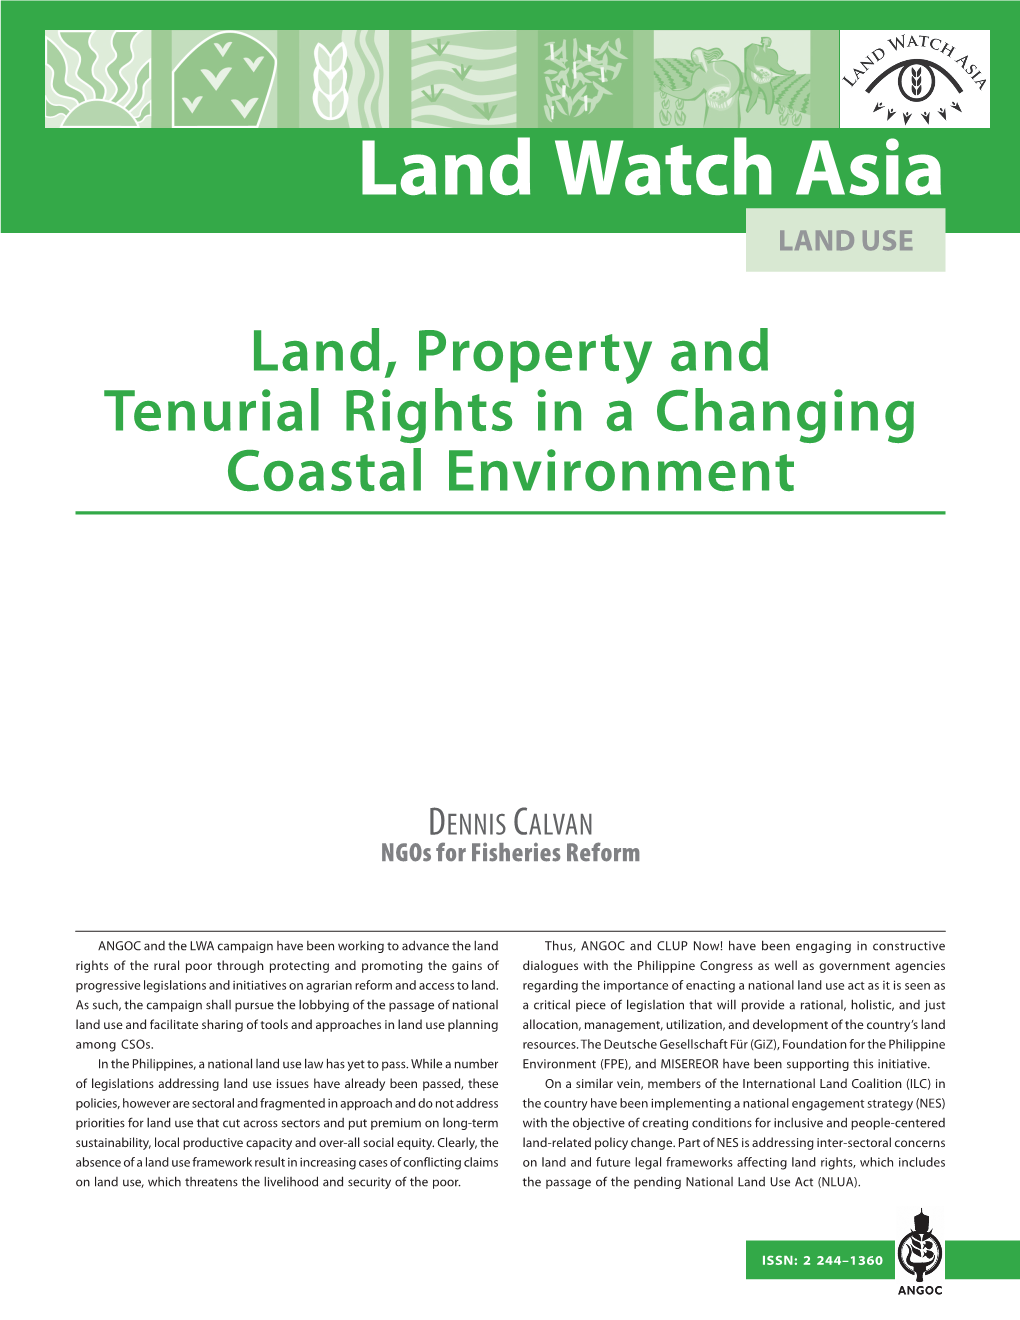 Land, Property and Tenurial Rights in a Changing Coastal Environment